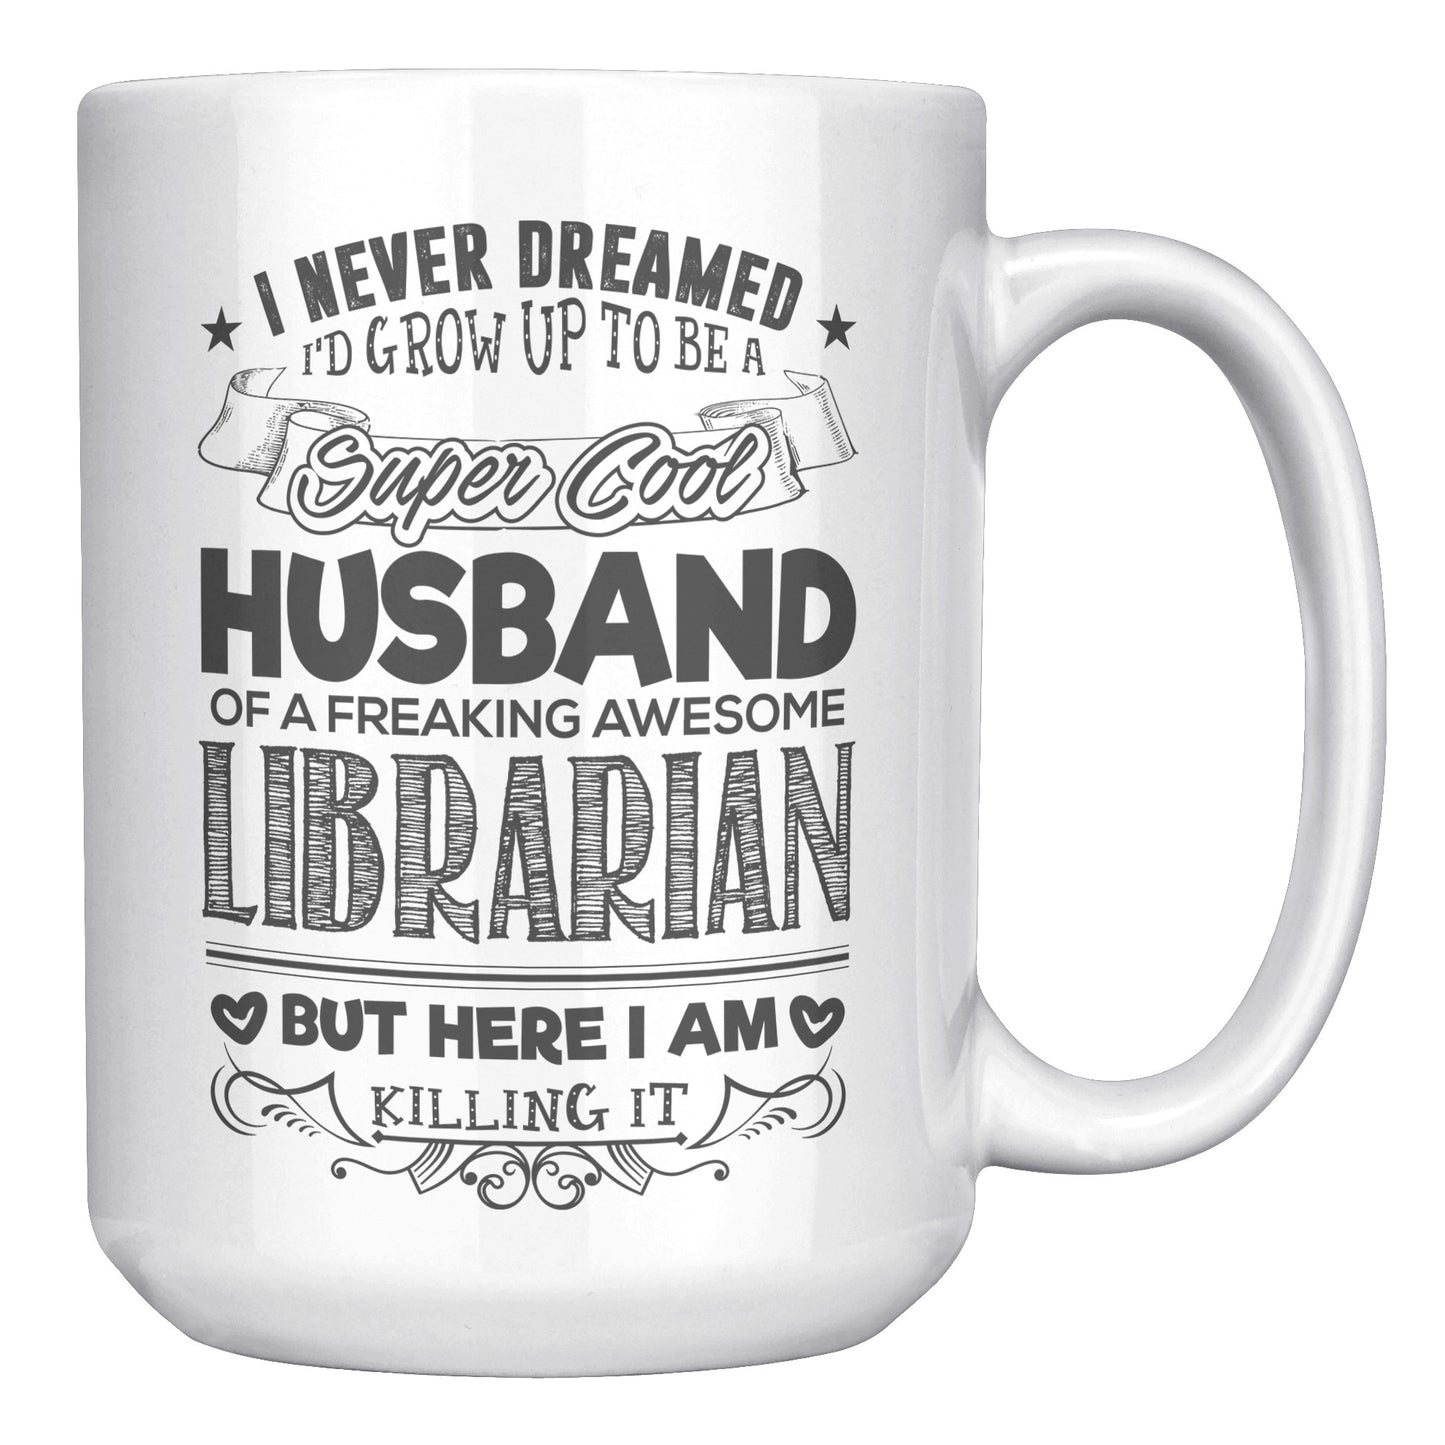 I Never Dreamed I'd Grow Up To Be A Super Cool Husband Of A Freaking Awesome Librarian But Here I Am Killing It | Mug